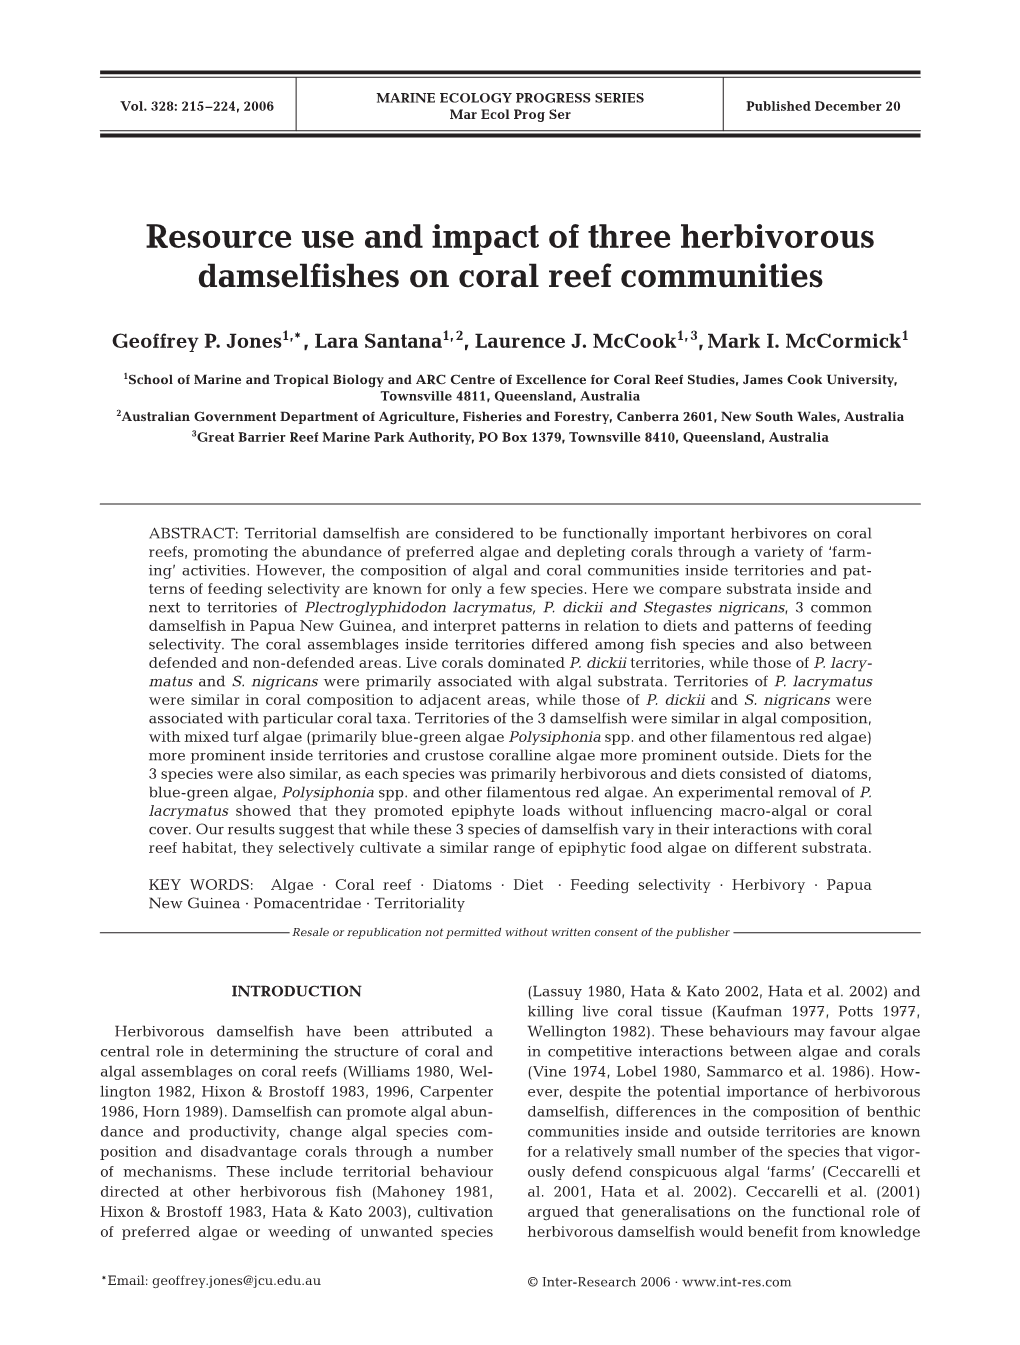 Resource Use and Impact of Three Herbivorous Damselfishes on Coral Reef Communities